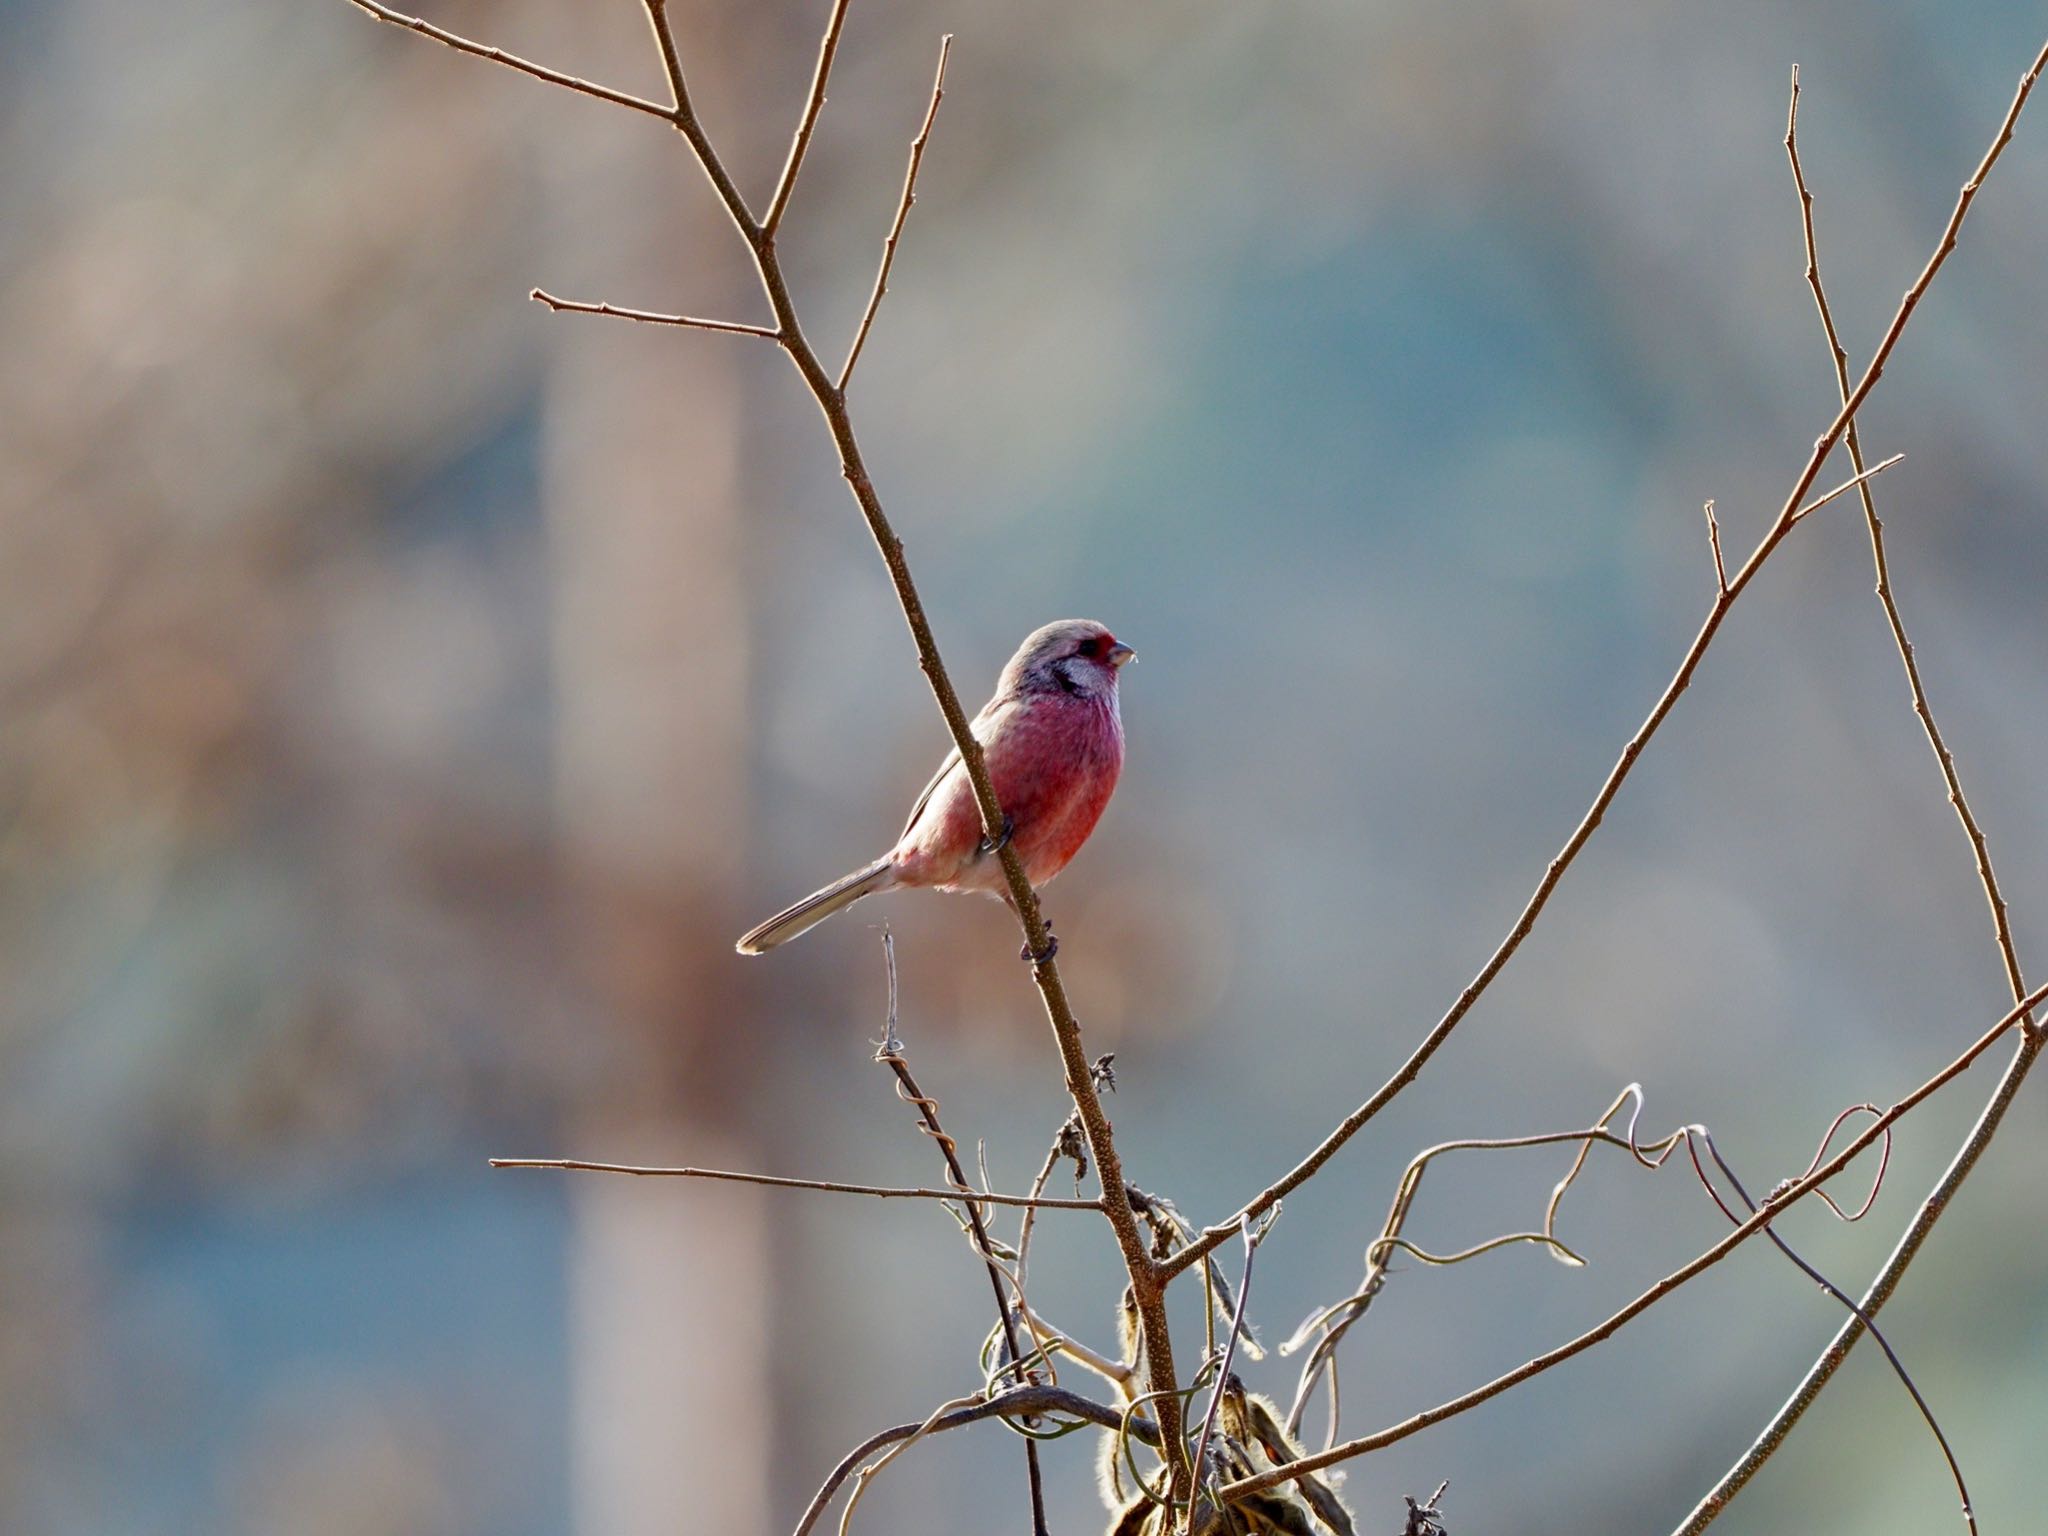 Photo of Siberian Long-tailed Rosefinch at きずきの森(北雲雀きずきの森) by speedgame